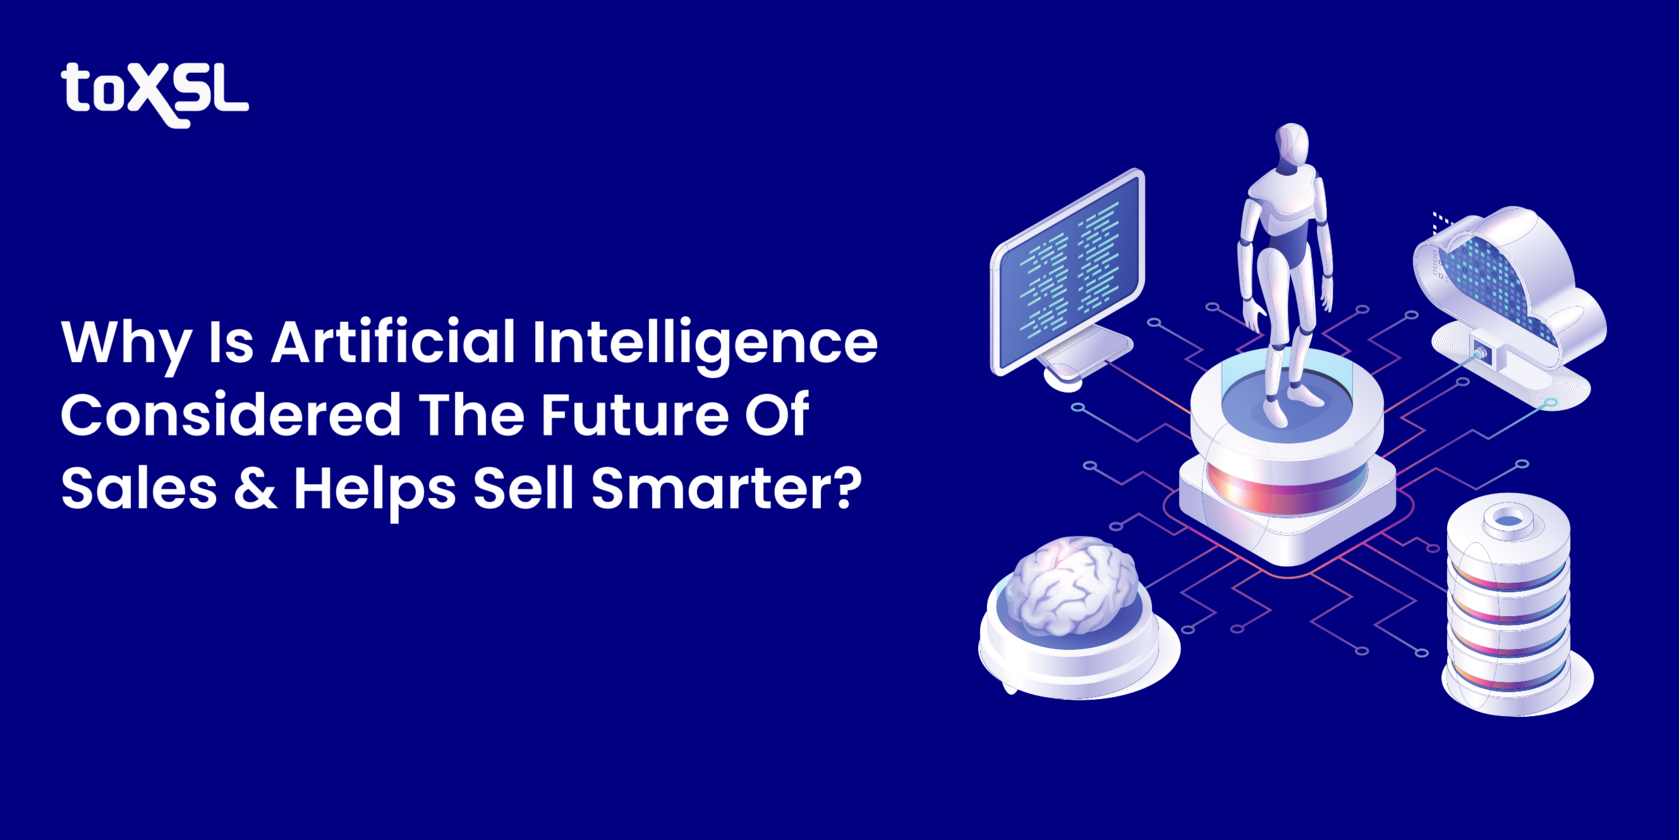 Why Is Artificial Intelligence Considered The Future Of Sales And Helps Sell Smarter?